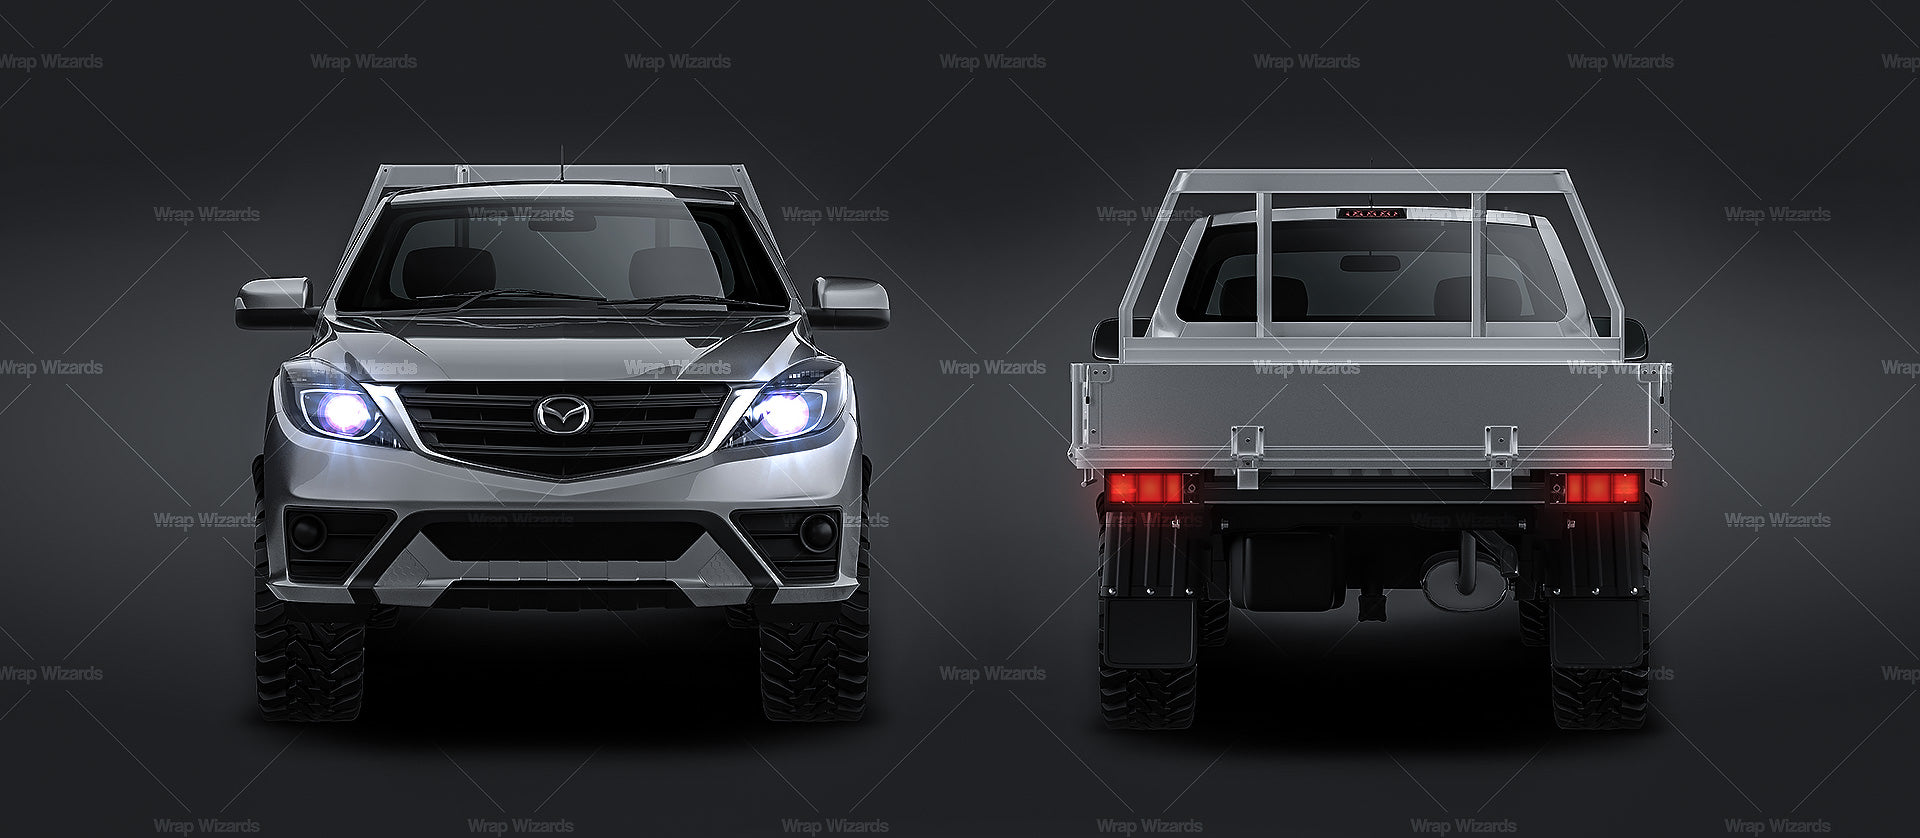 Mazda BT-50 Freestyle Cab Alloy Tray 2018-2021 glossy finish - all sides Car Mockup Template.psd